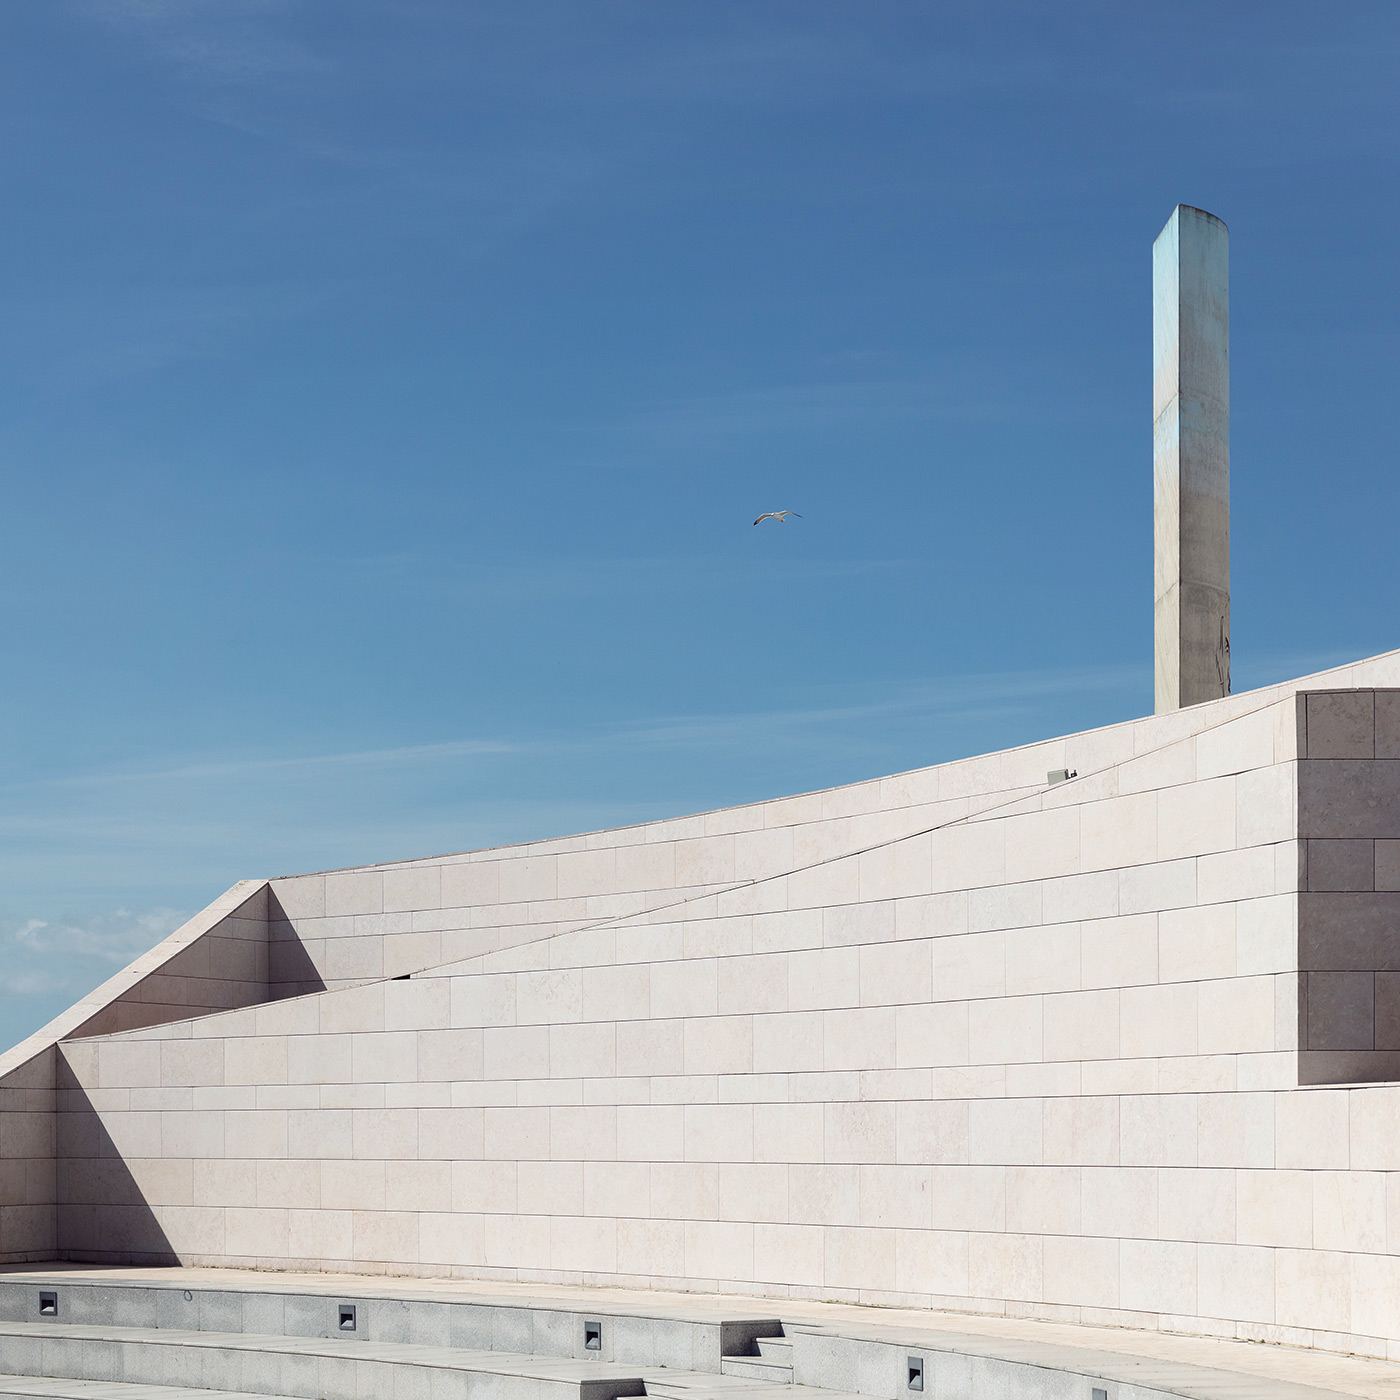 Champalimaud Center for the Unknown . Location: Lisbon, Portugal . Architect: Charles Correa Associates